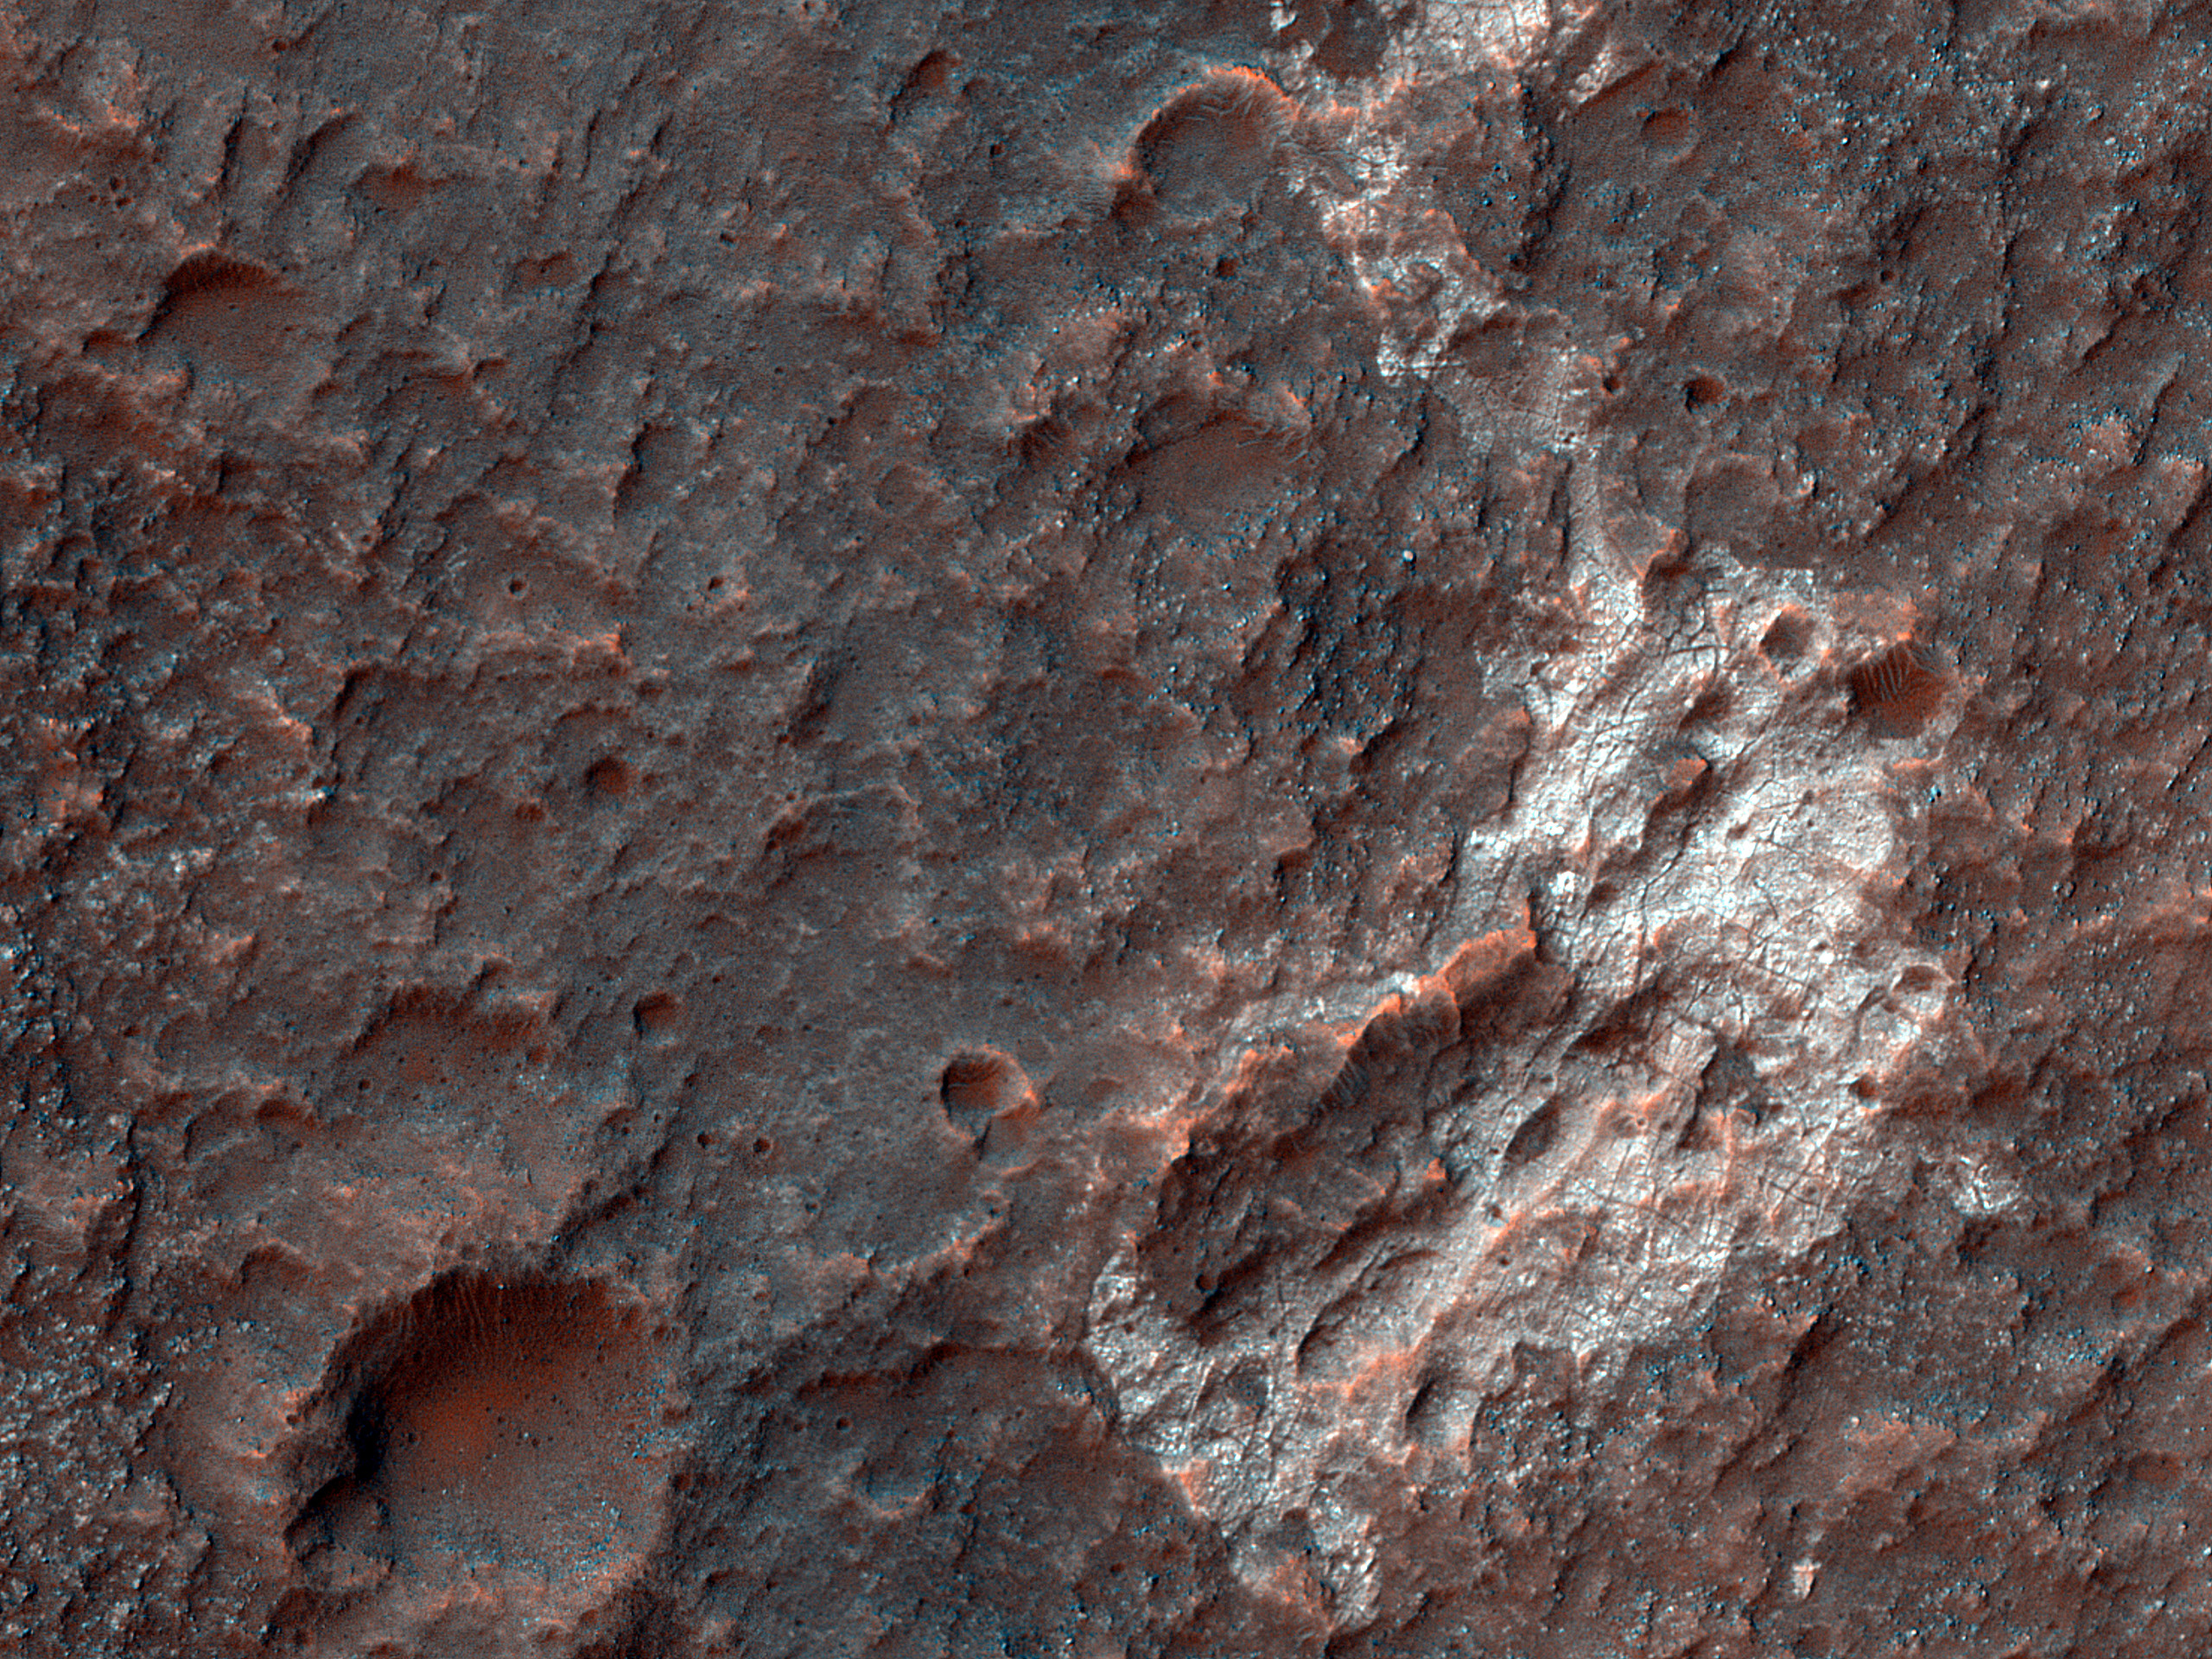 A Patchy Outcrop of Light-Toned Materials